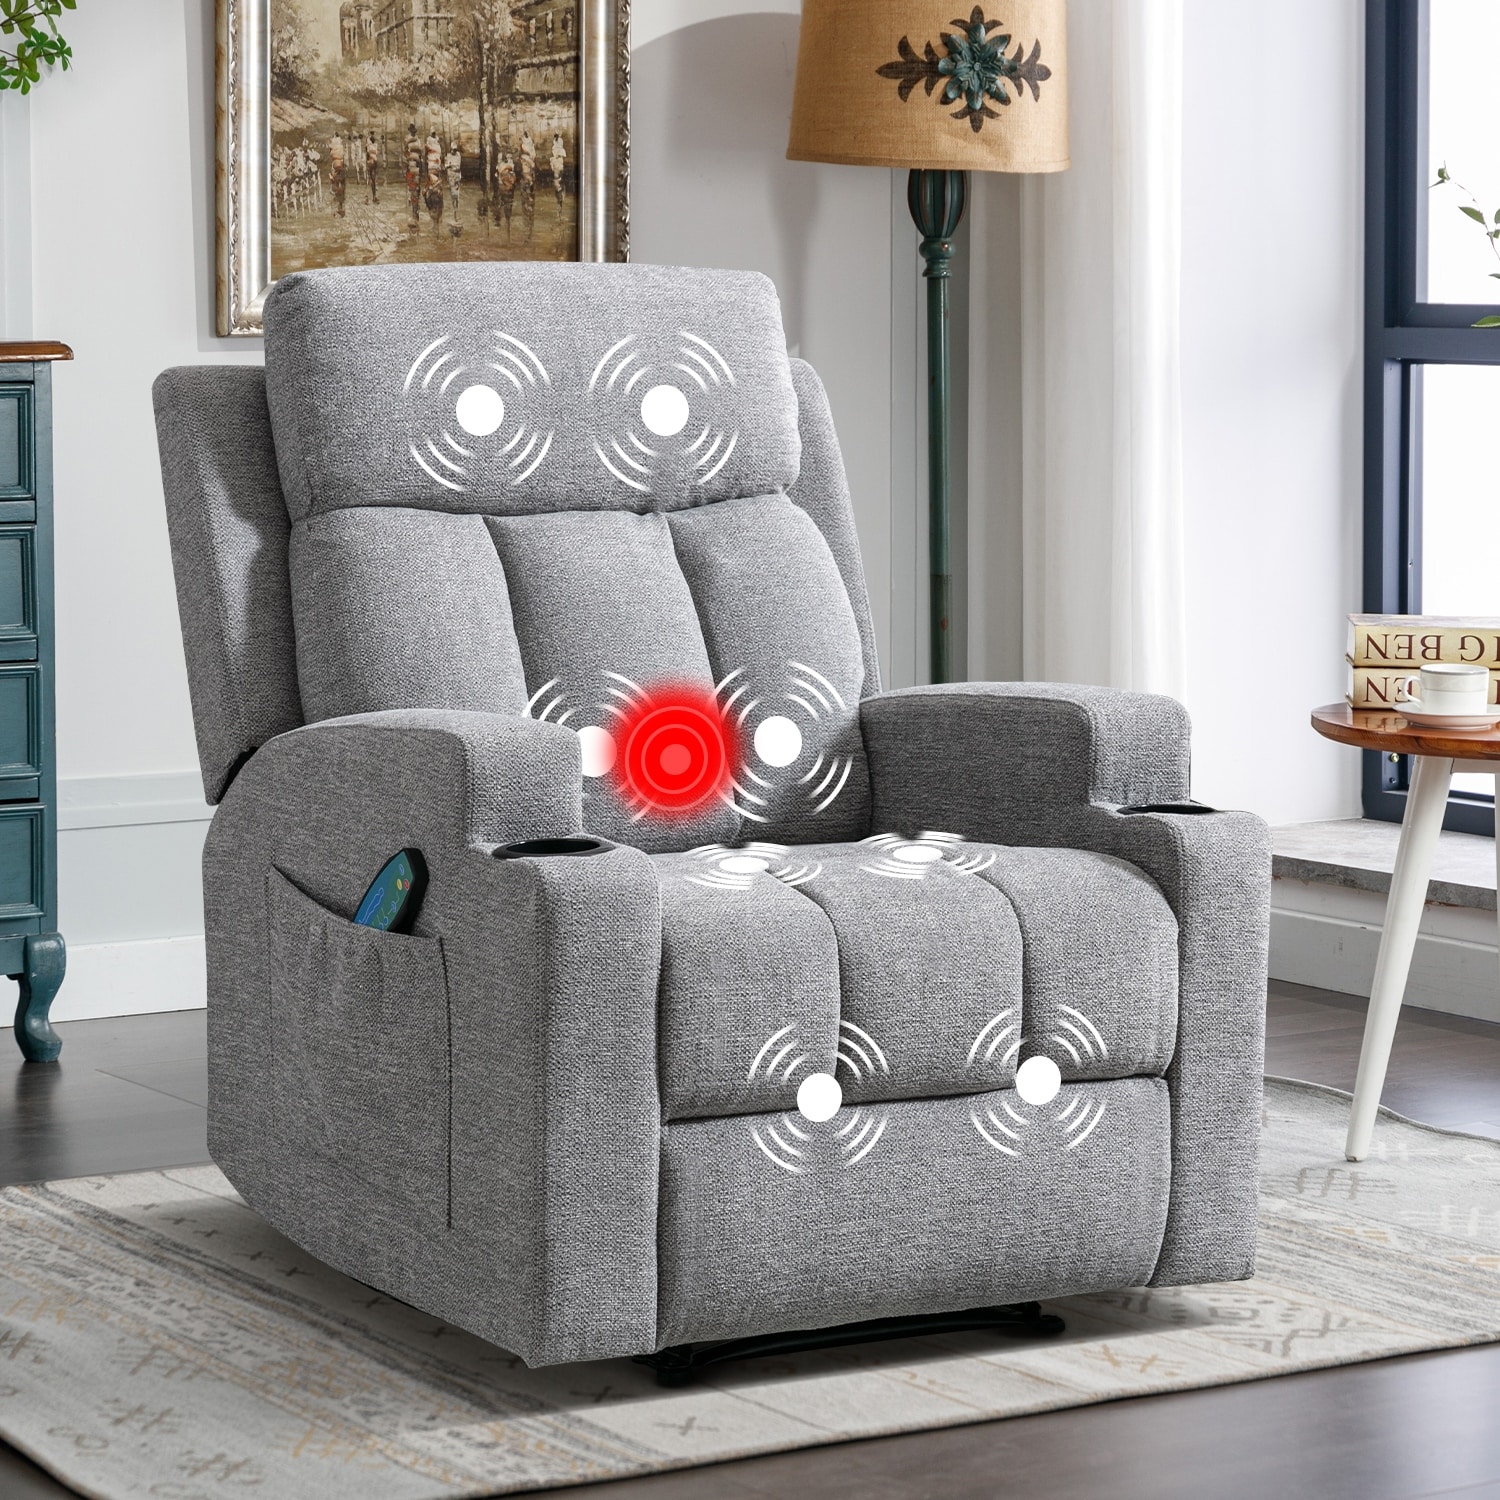 Massage Recliner Chair, Fabric Recliner Sofa Home Theater Seating with  Lumbar Support Winback Single Sofa Armchair Reclining Chair Easy Lounge for